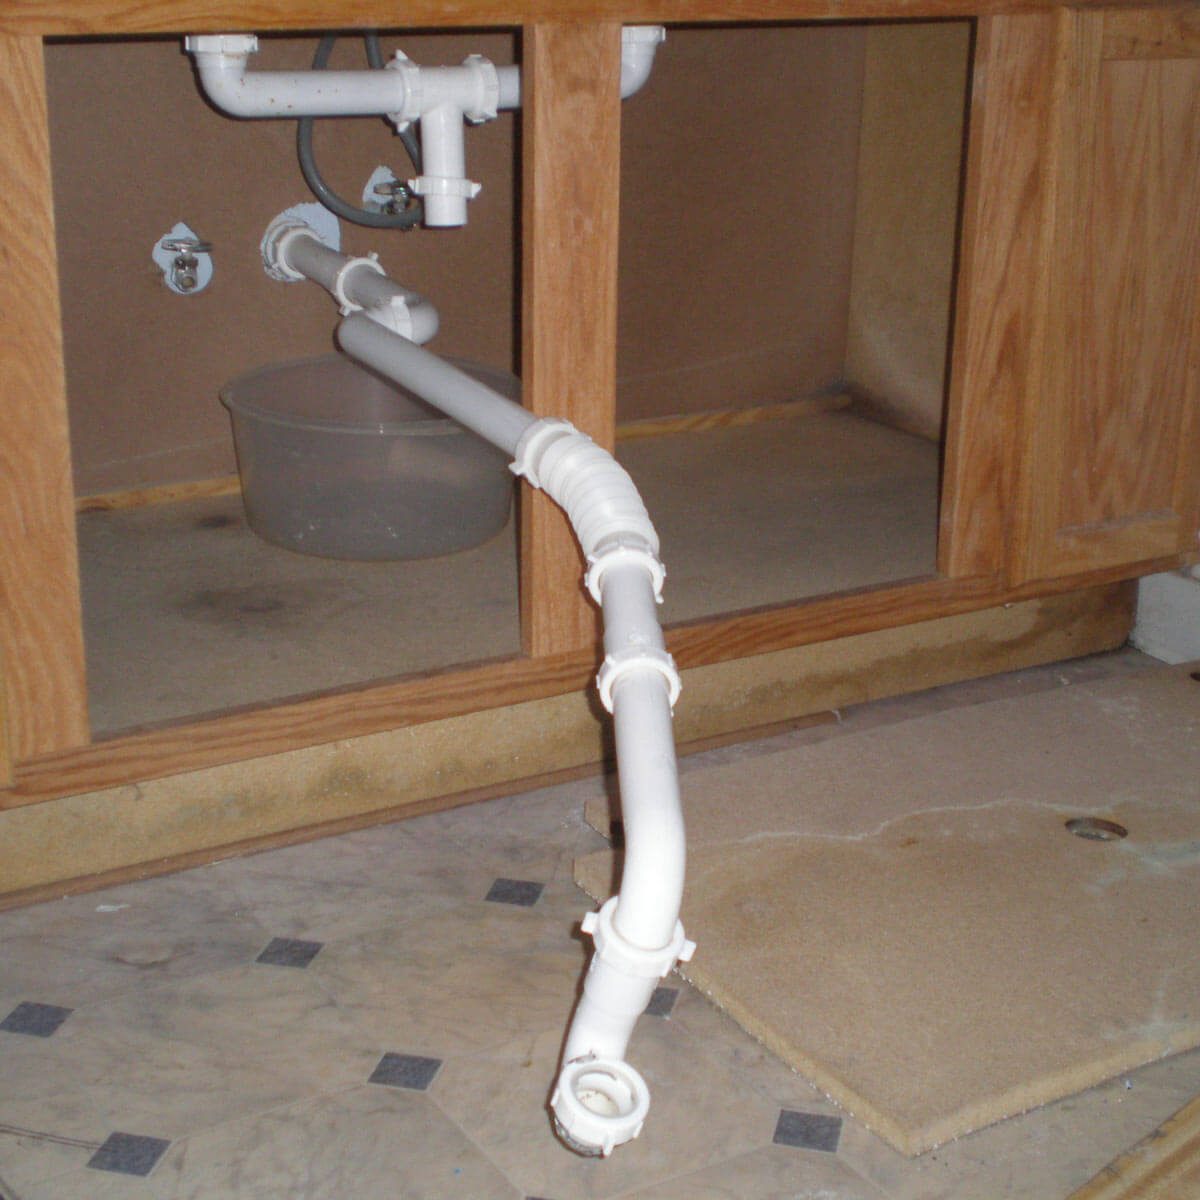 Roughing in for a centrally located sink